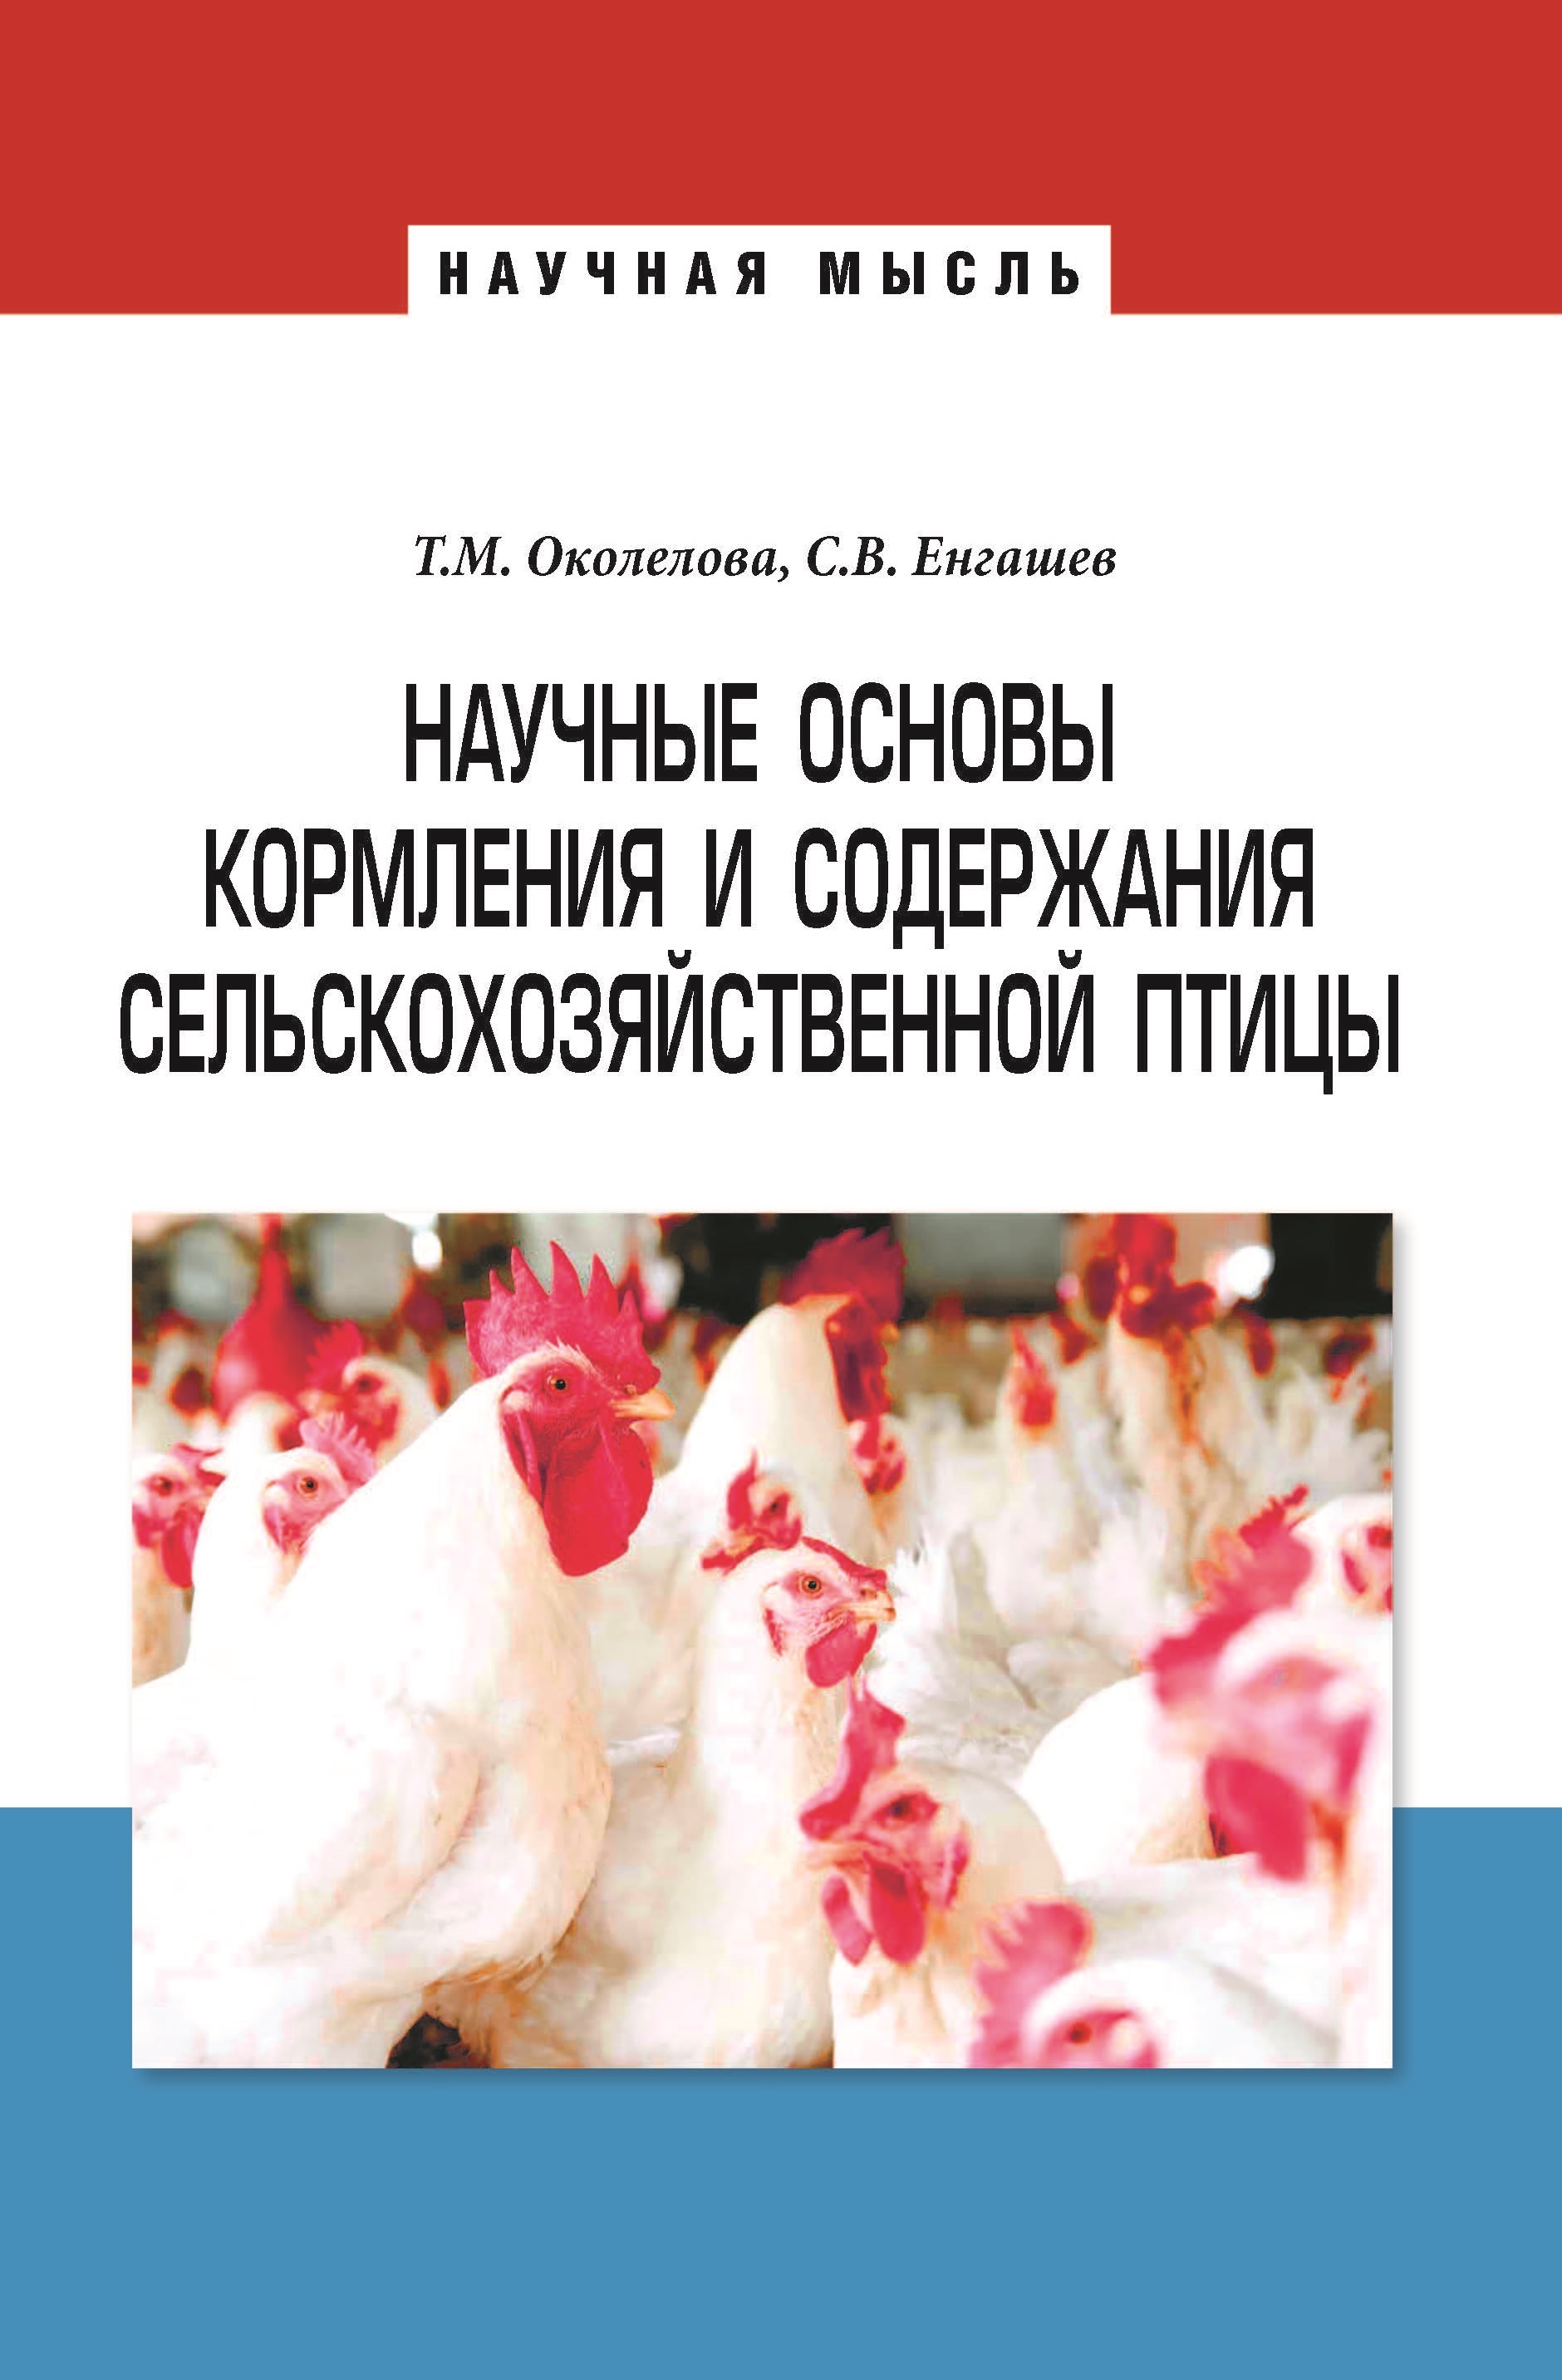                         Scientific basis of feeding and keeping poultry
            